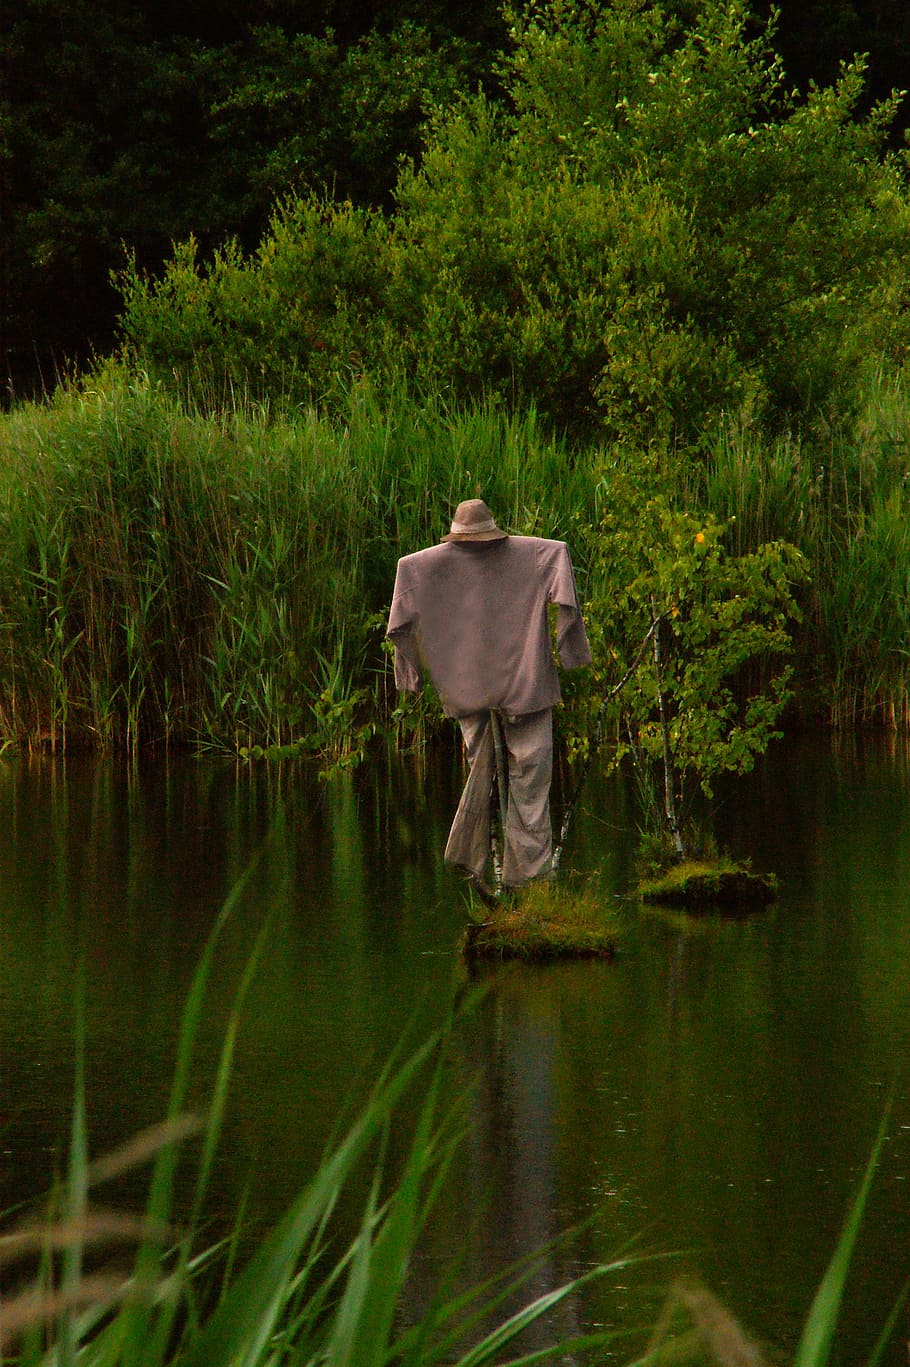 water scarecrow, water, lans, trees, switch off, lake, relax, nature, mood, landscape